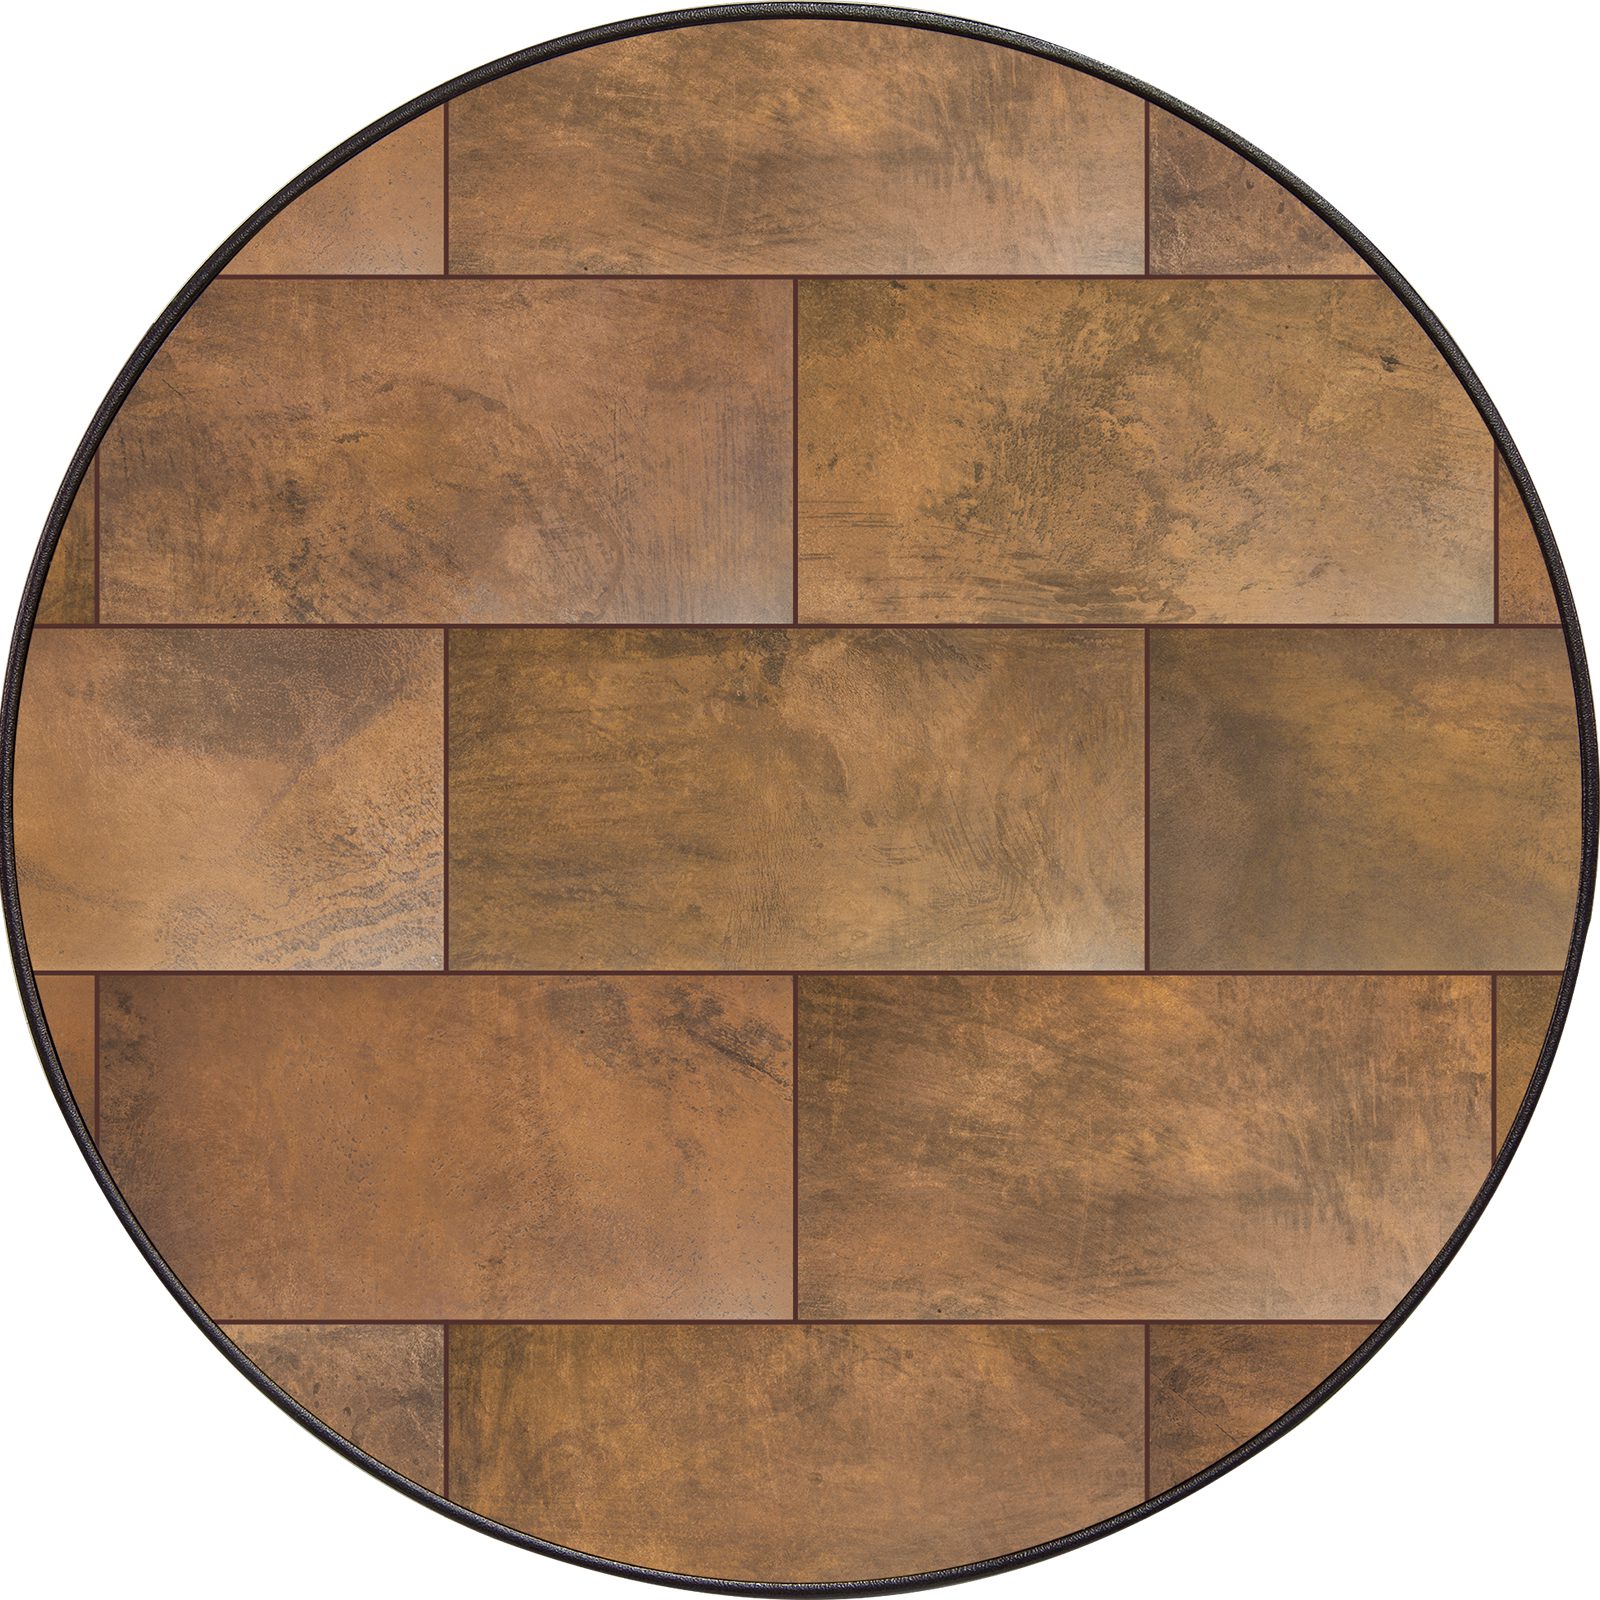 54" Round City Top - Porcelain Table Tops - City Series 40